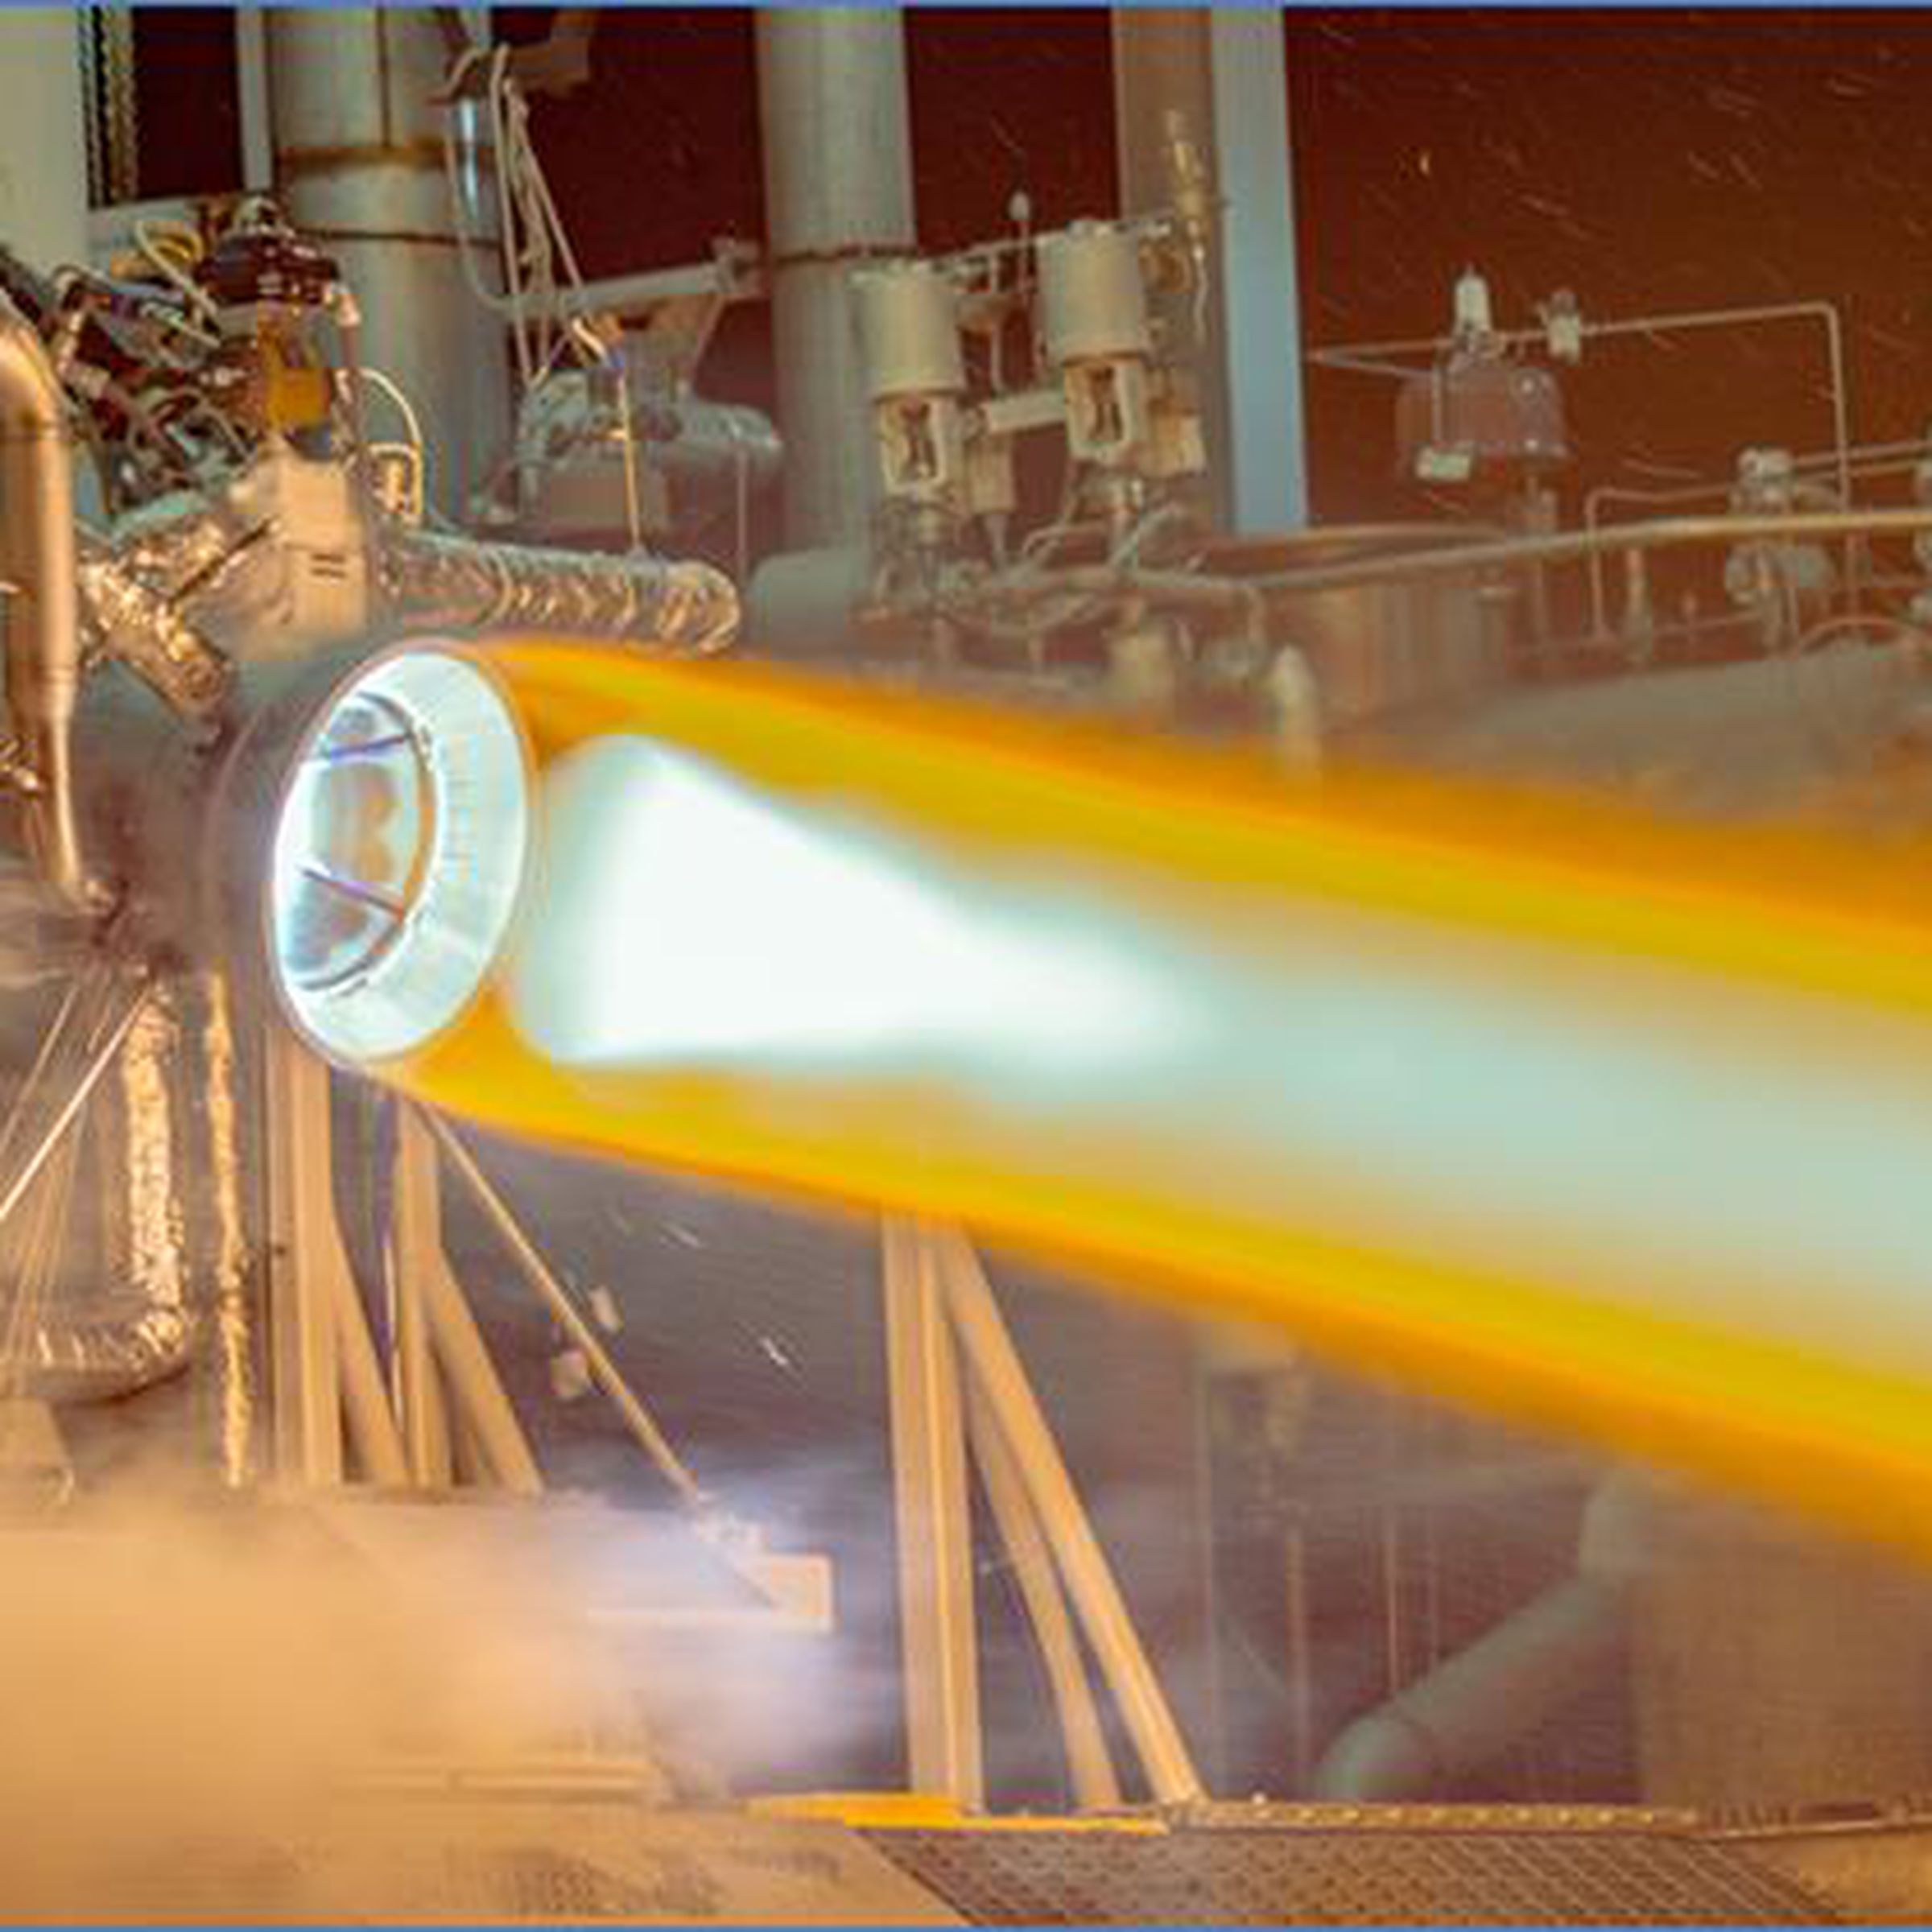 Aerojet’s RL10 engine during a hot-fire test